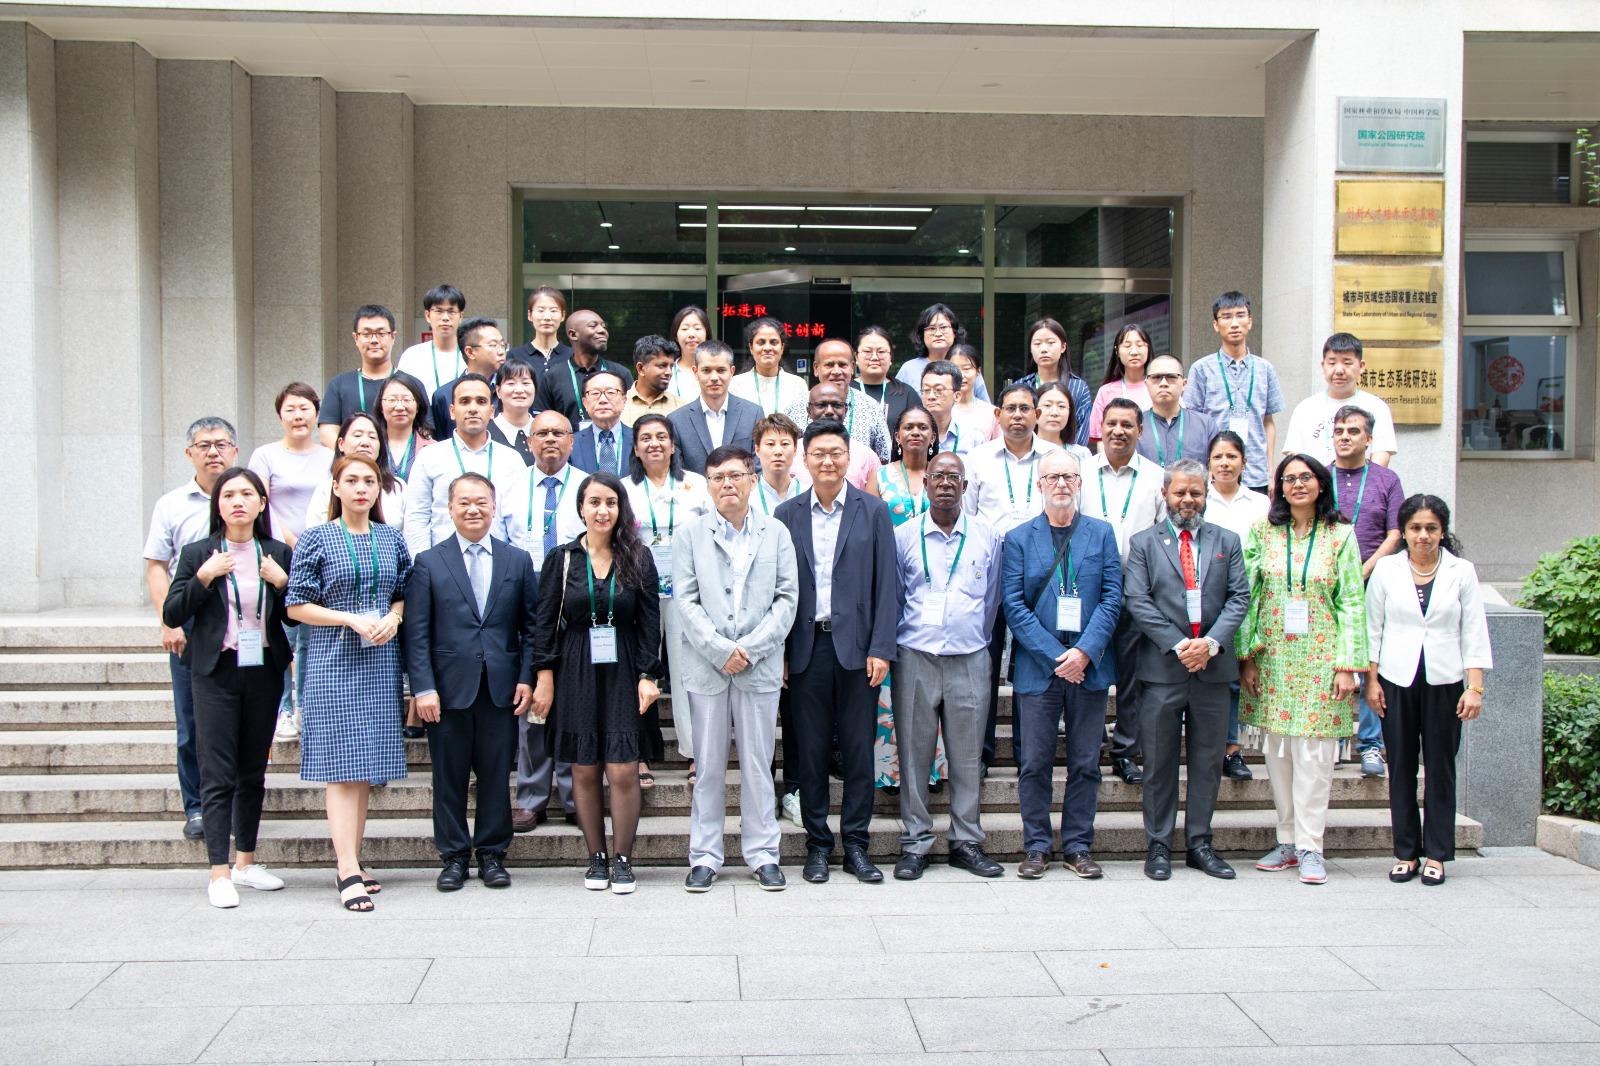 The Director of Environmental Protection, Dr Samuel Chui, today (September 7) attended the International Symposium on Environmental Microbes of Health Concern held under the Belt and Road Initiative in Beijing and visited the Ministry of Ecology and Environment. Photo shows Dr Chui (front row, third left) with international experts and representatives from Belt and Road countries who attended the international symposium.